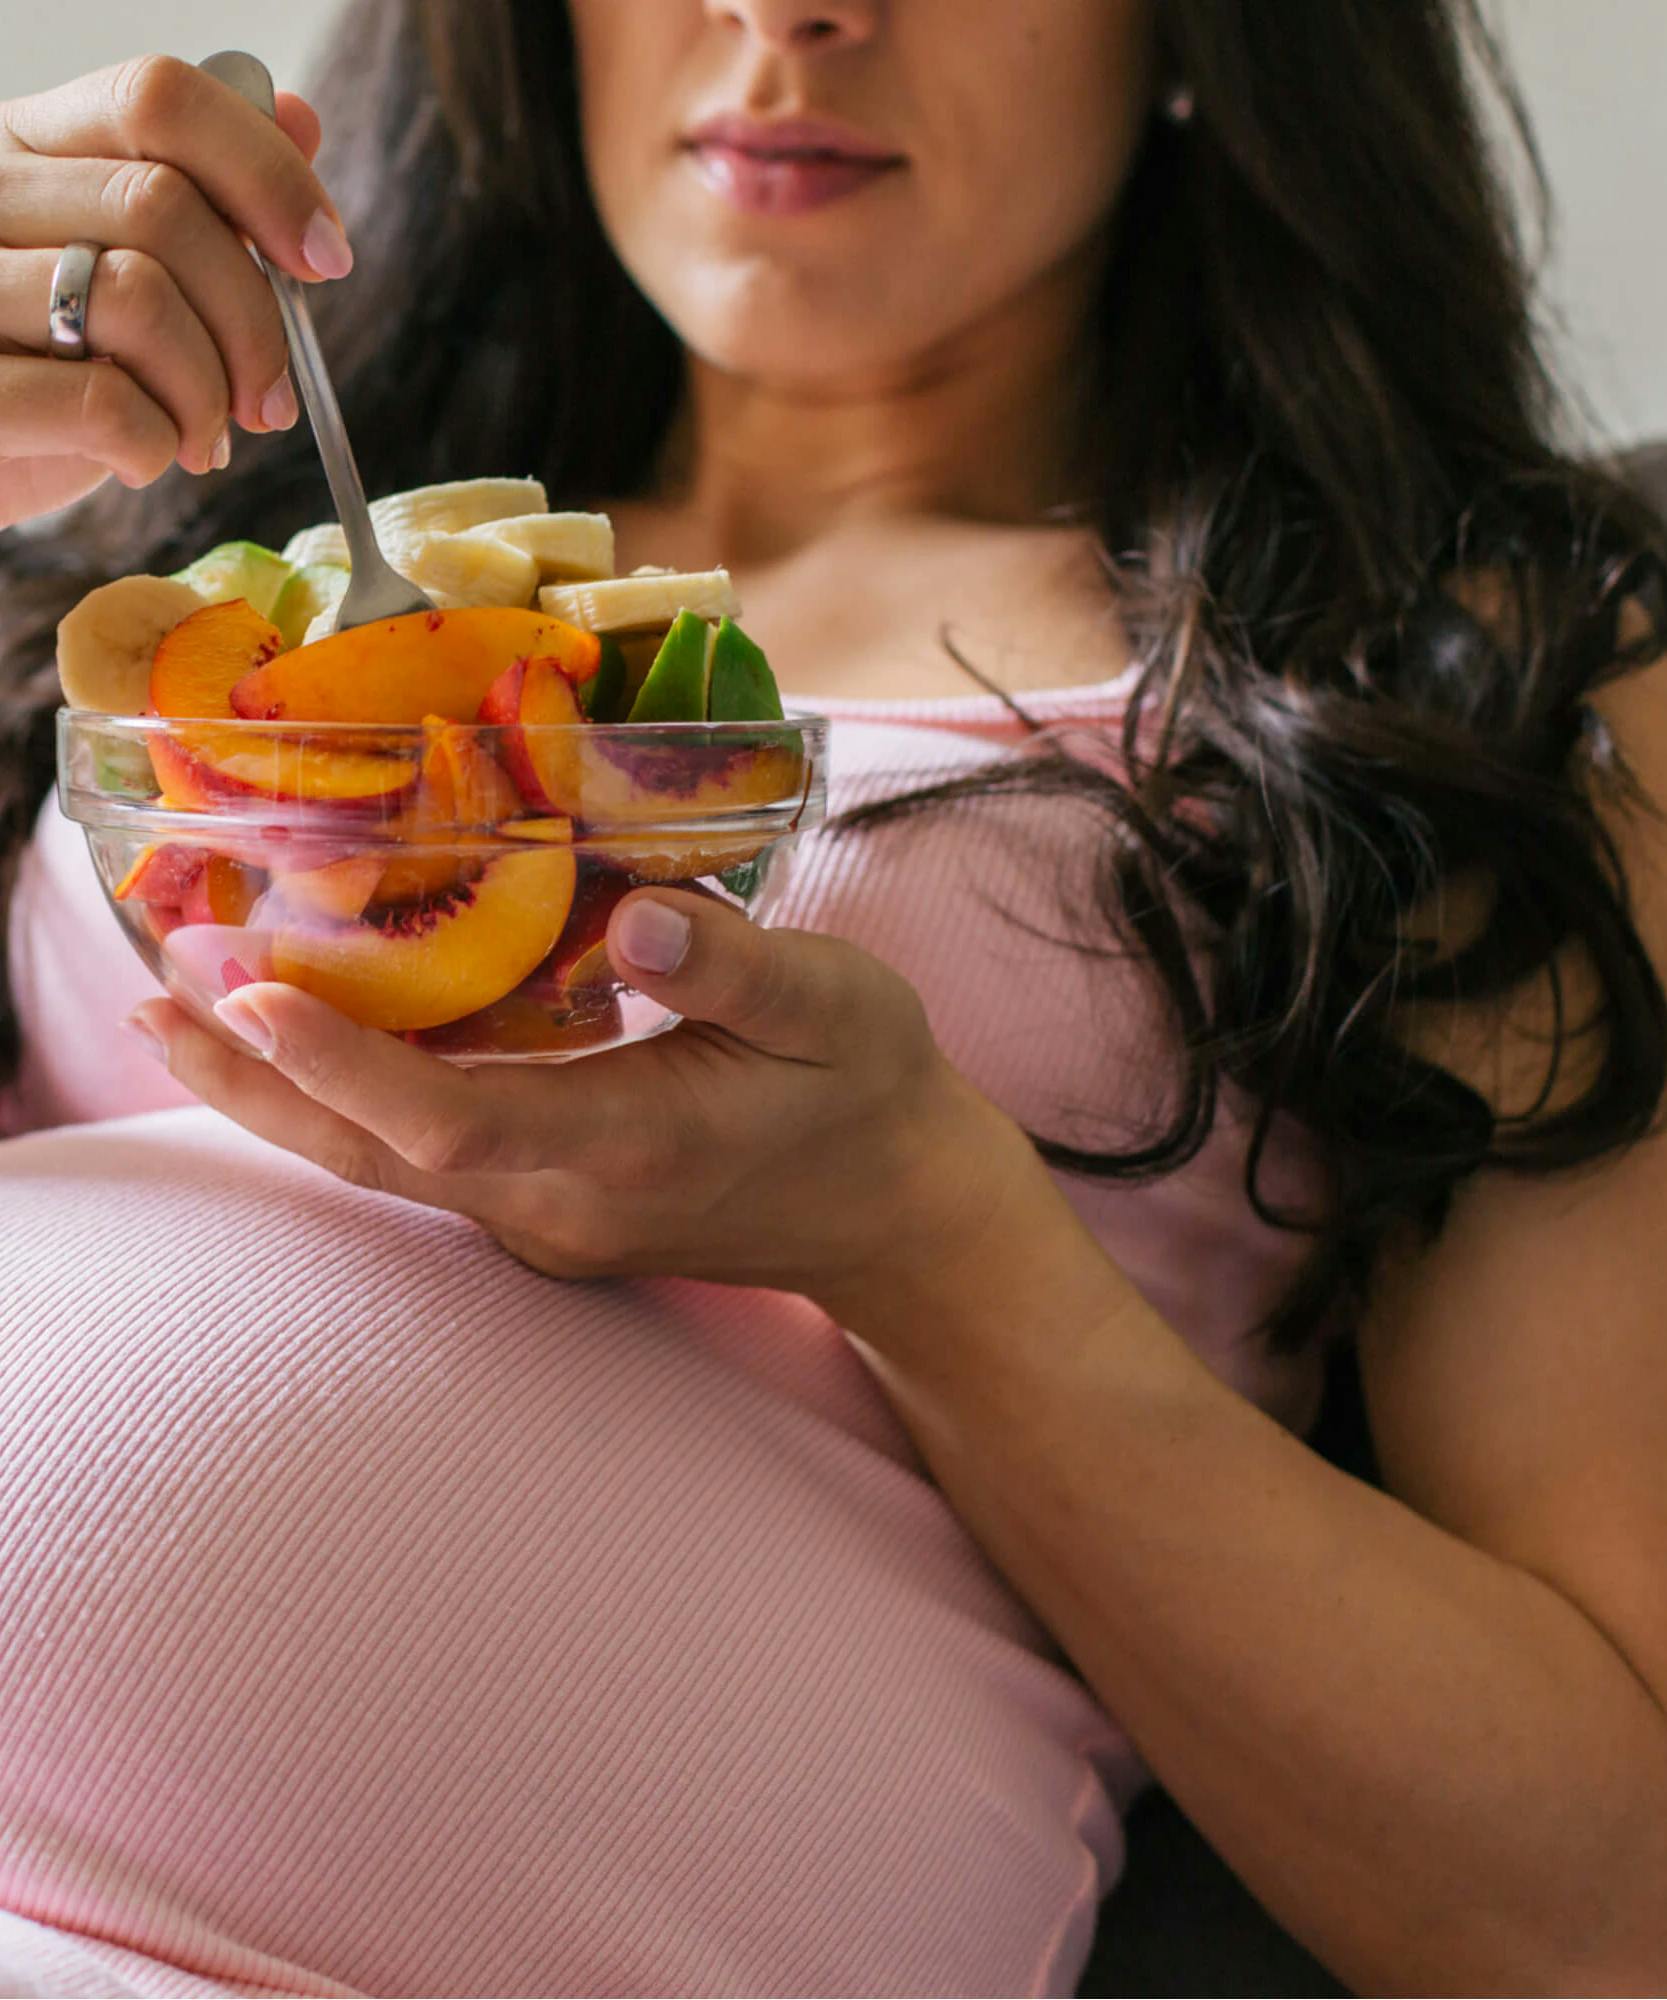 Veganism Is Bad For Pregnant Women And Their Babies. So Why Are We Encouraging It? shutterstock